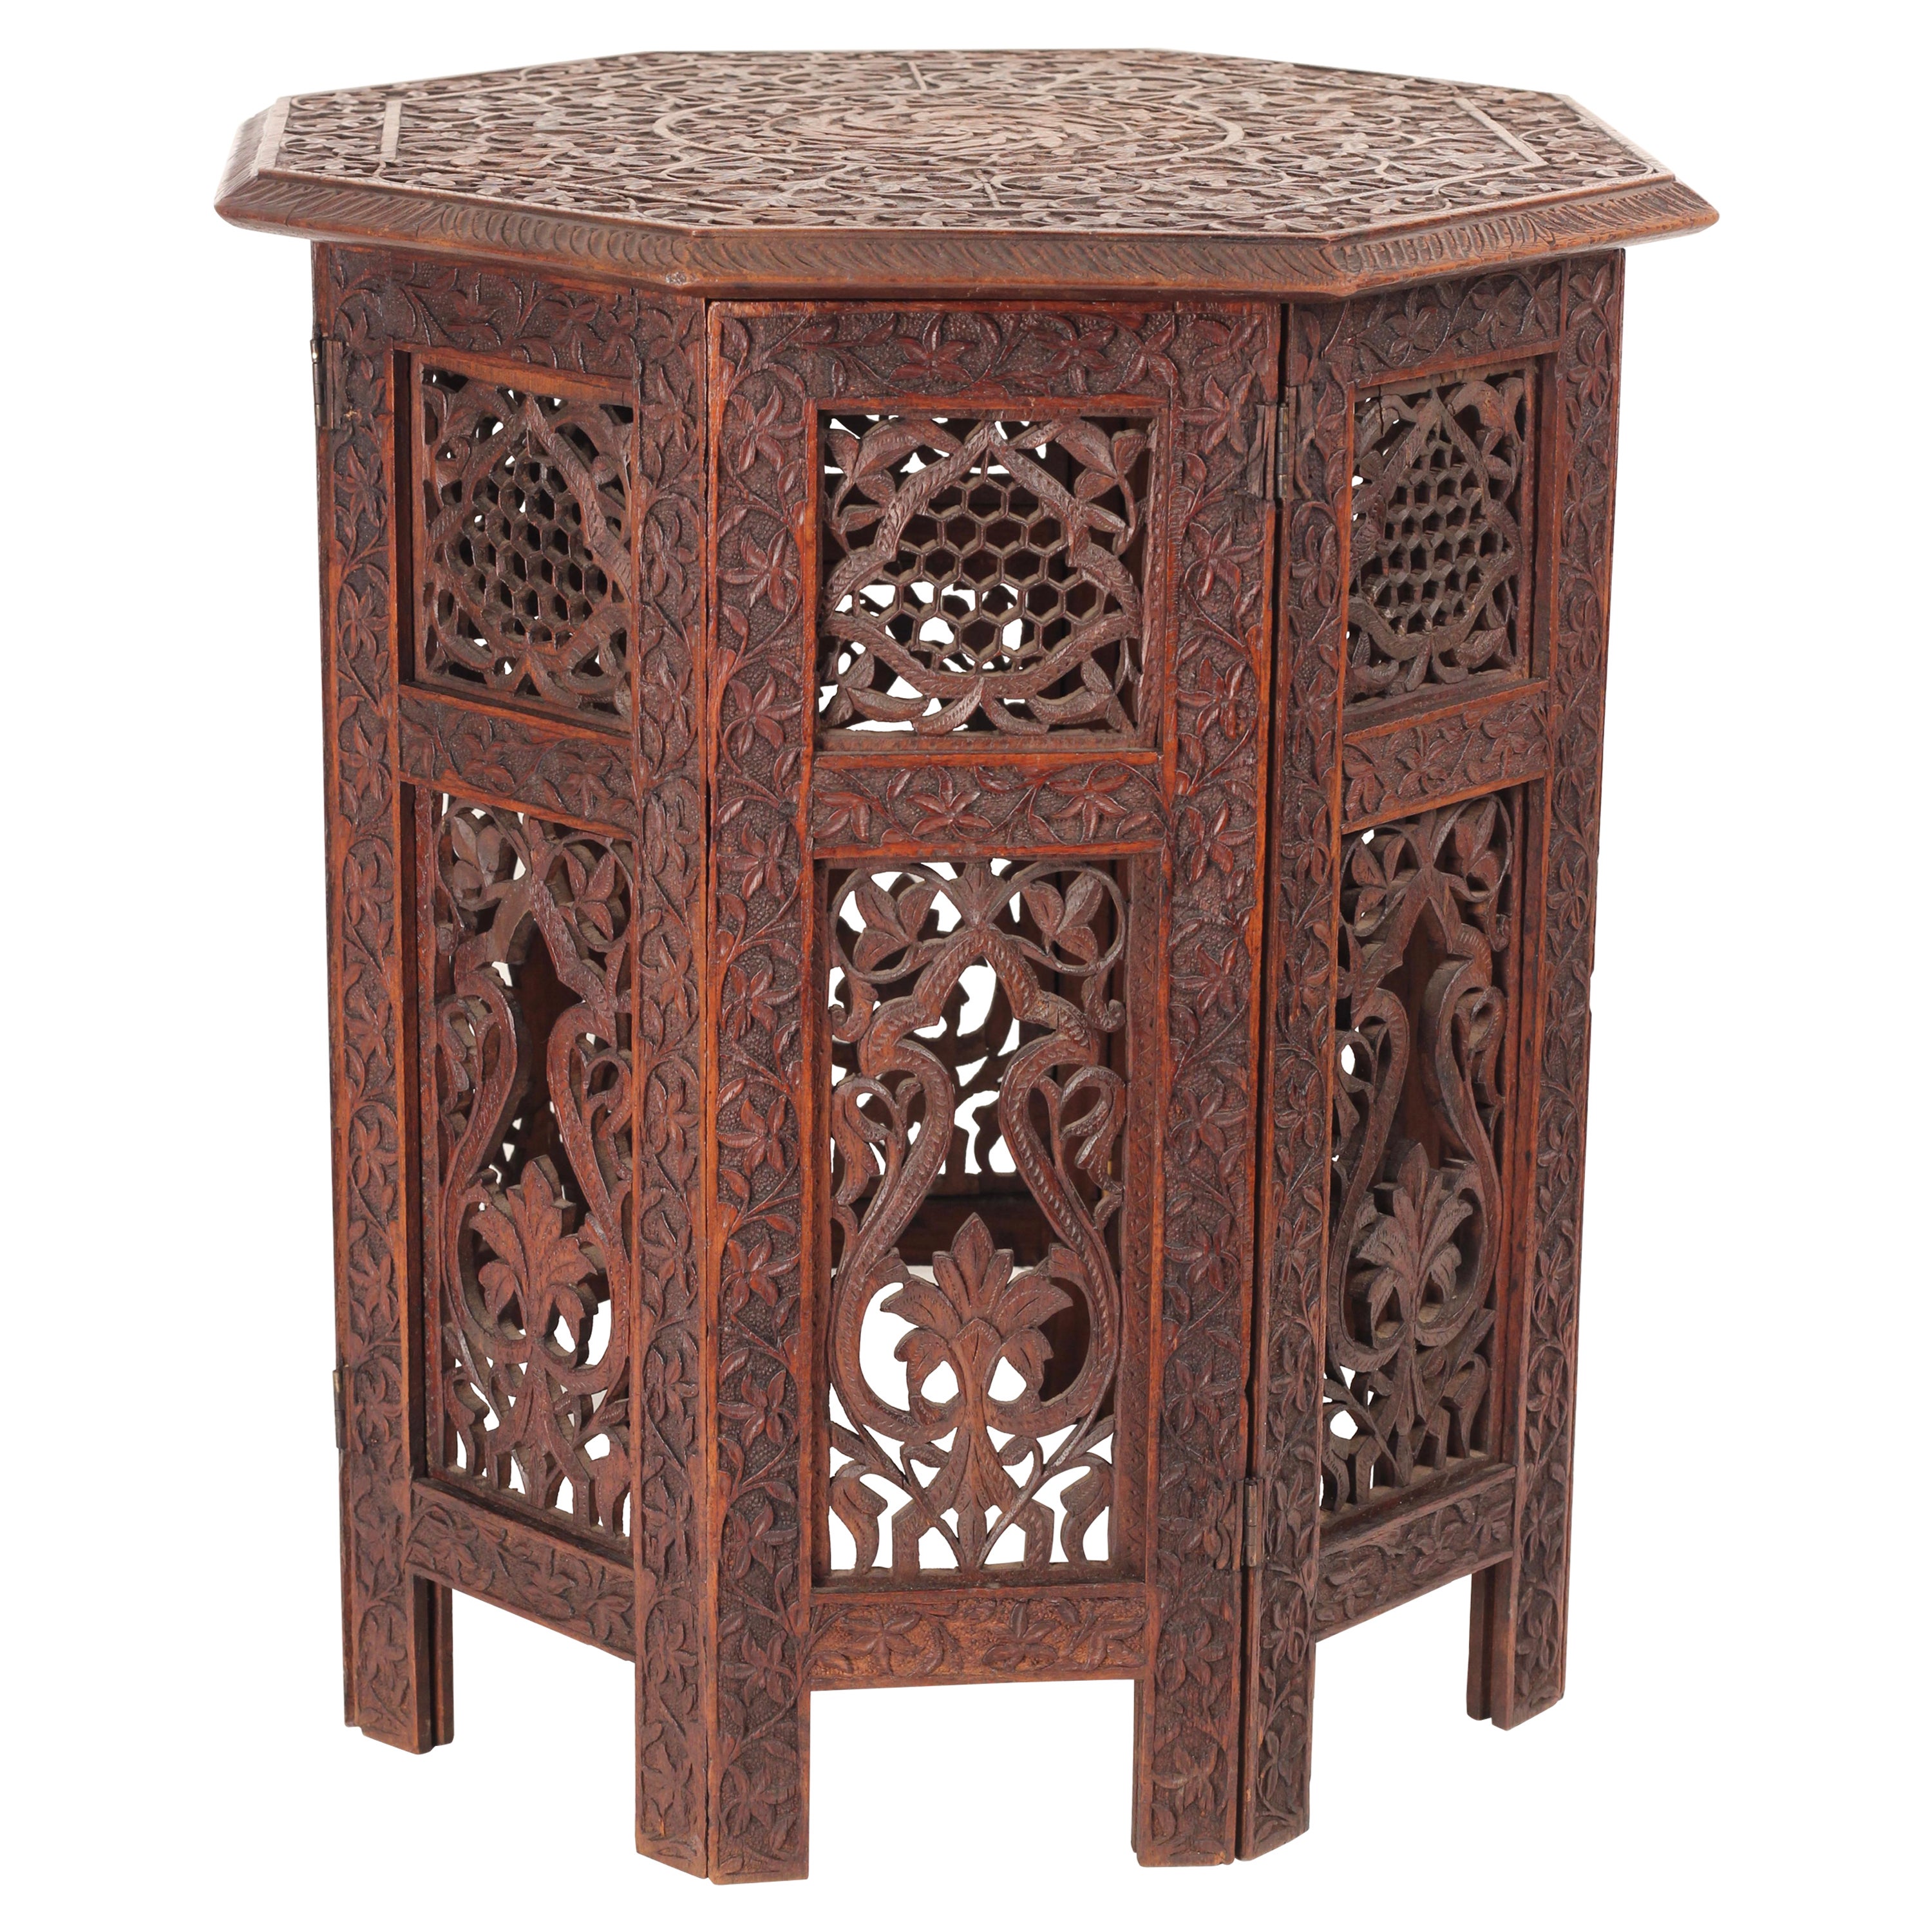 Boho Chic style 19th Century Hand Carved Wooden Moorish Octagonal Table For Sale